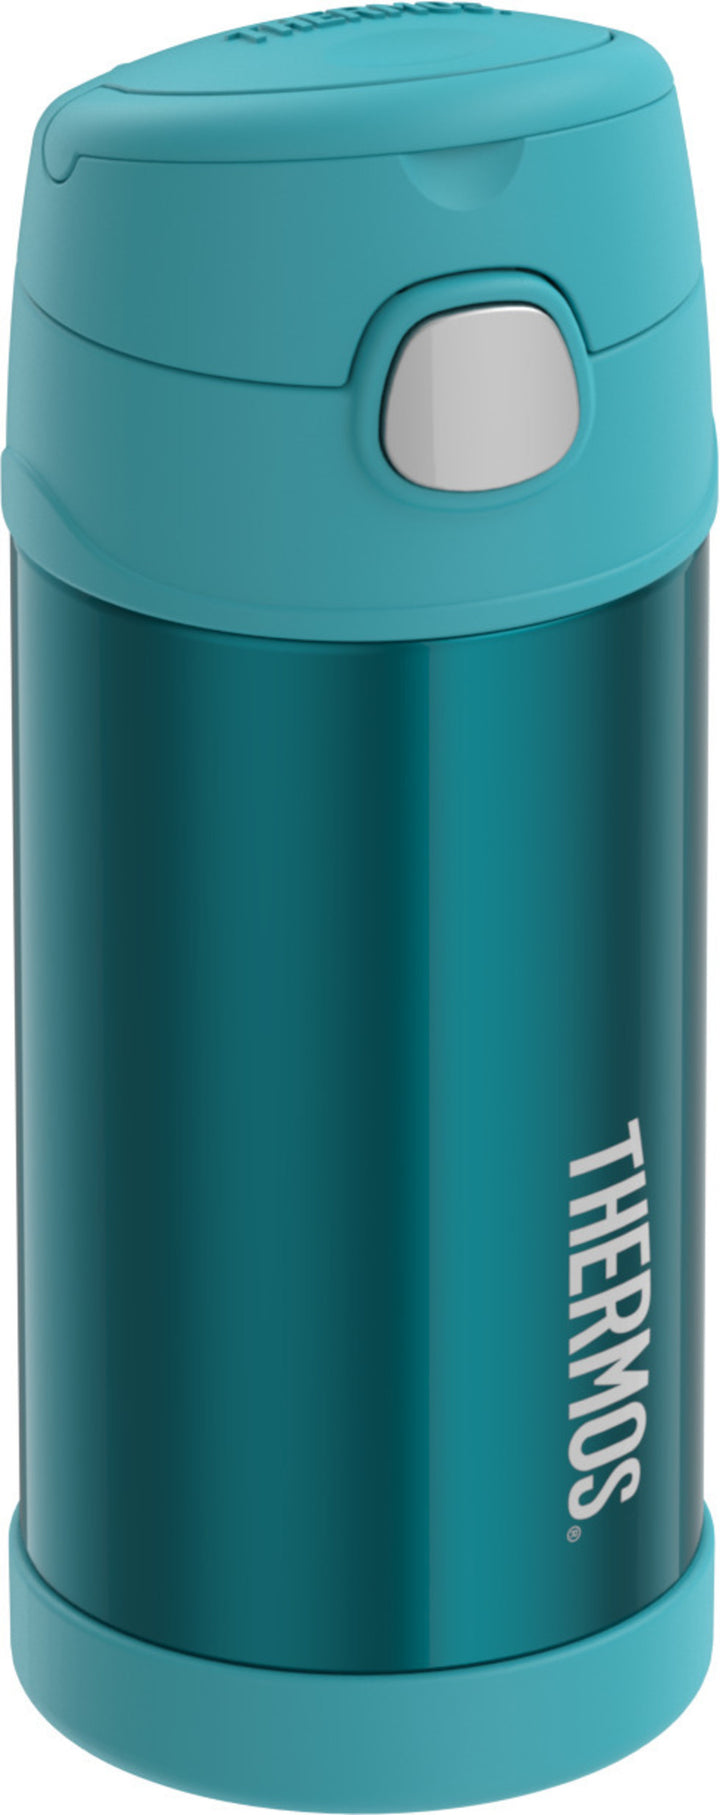 Thermos Funtainer Insulated Drink Bottle - Teal